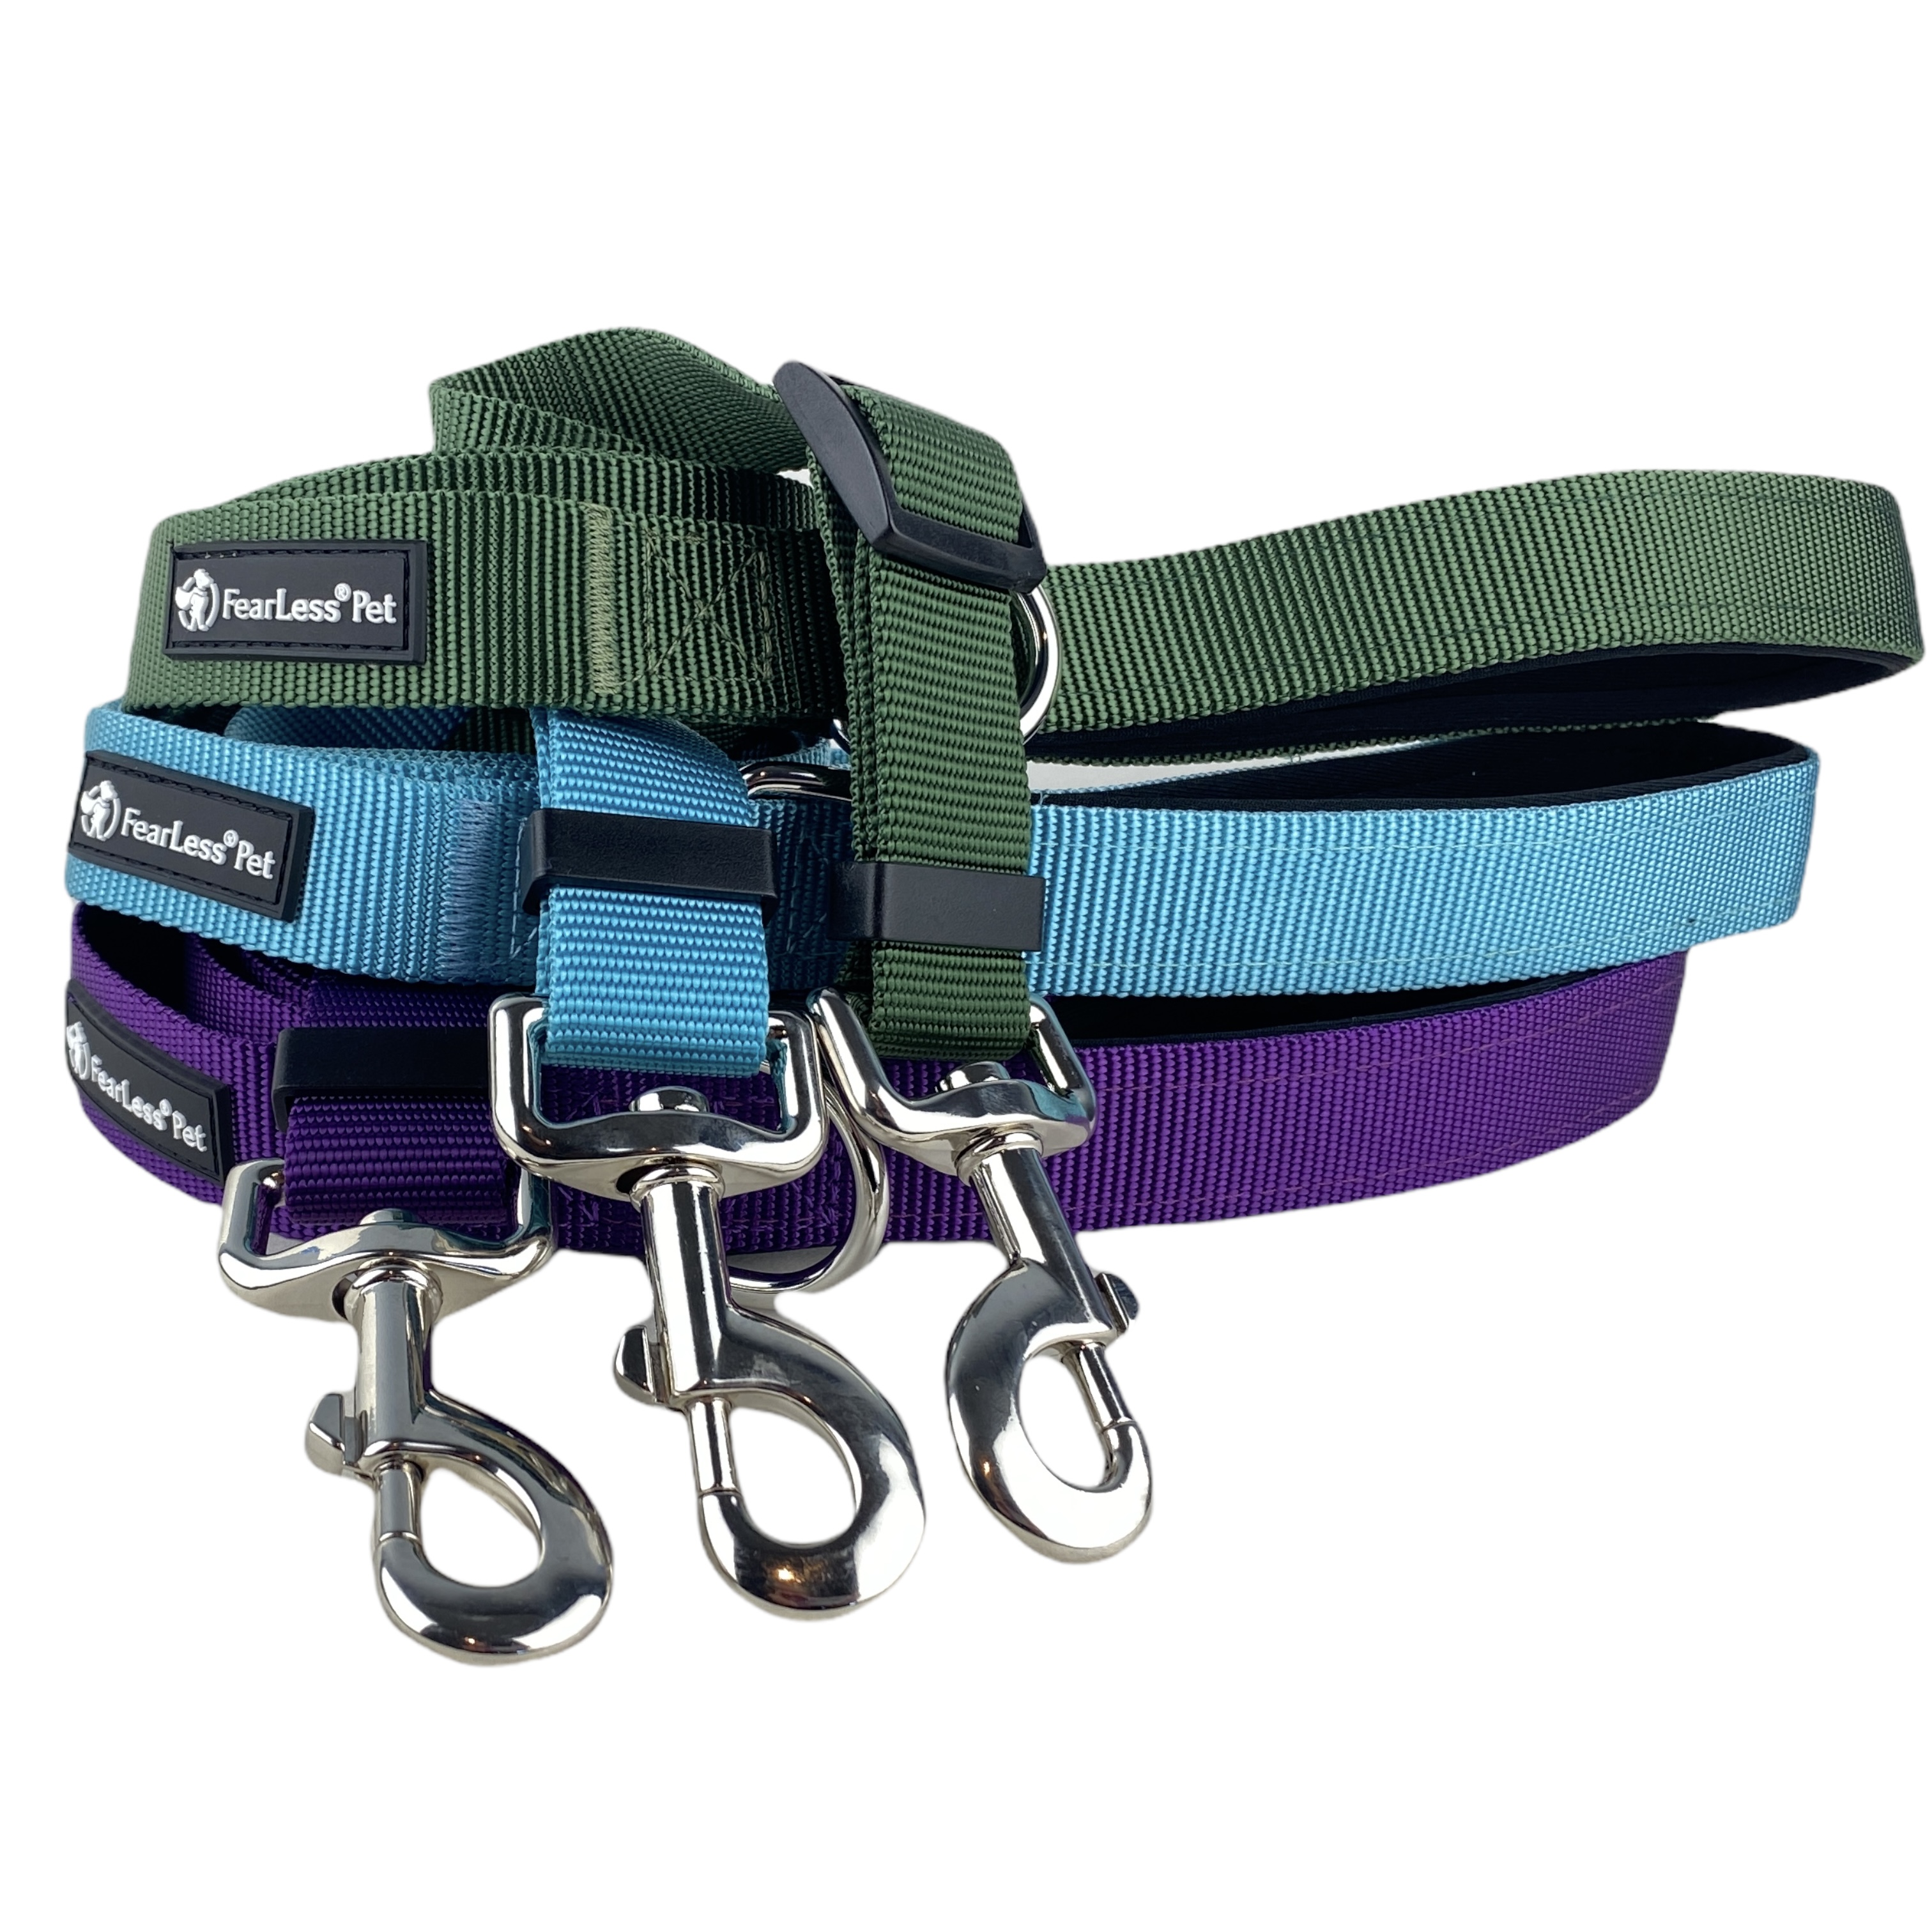 a photo of adjustable dog leash from fearless pet